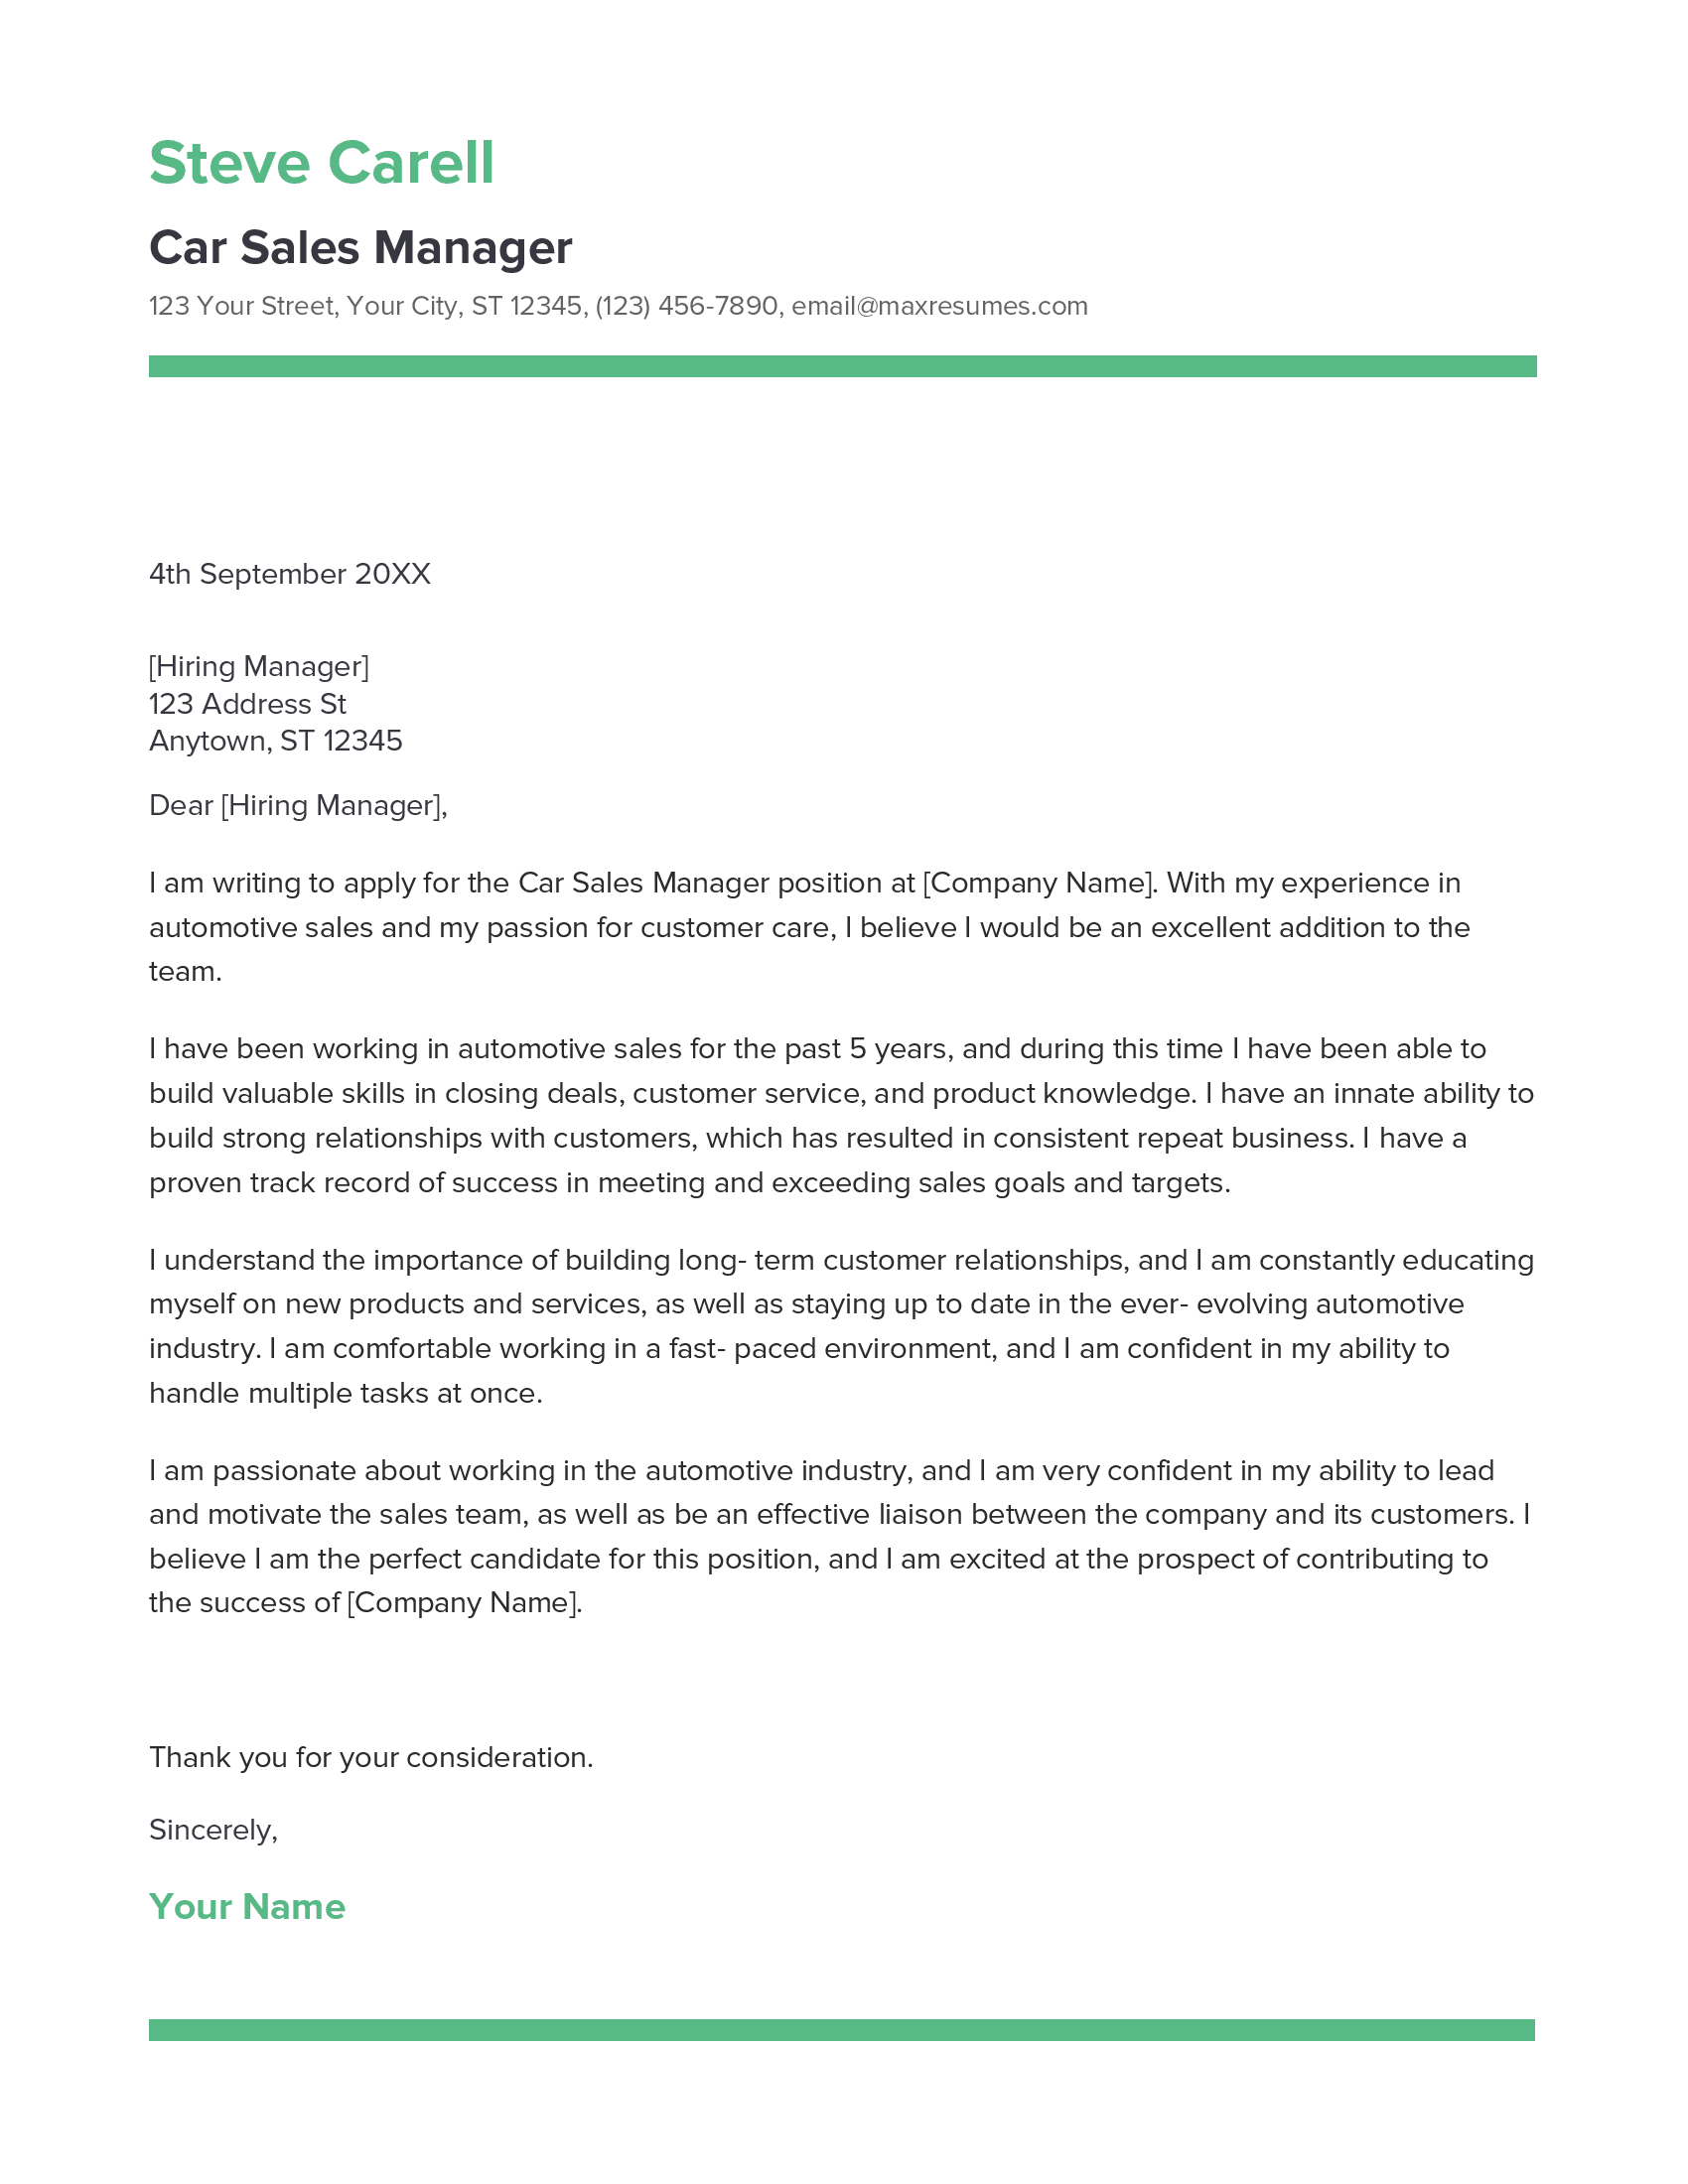 Car Sales Manager Cover Letter Example